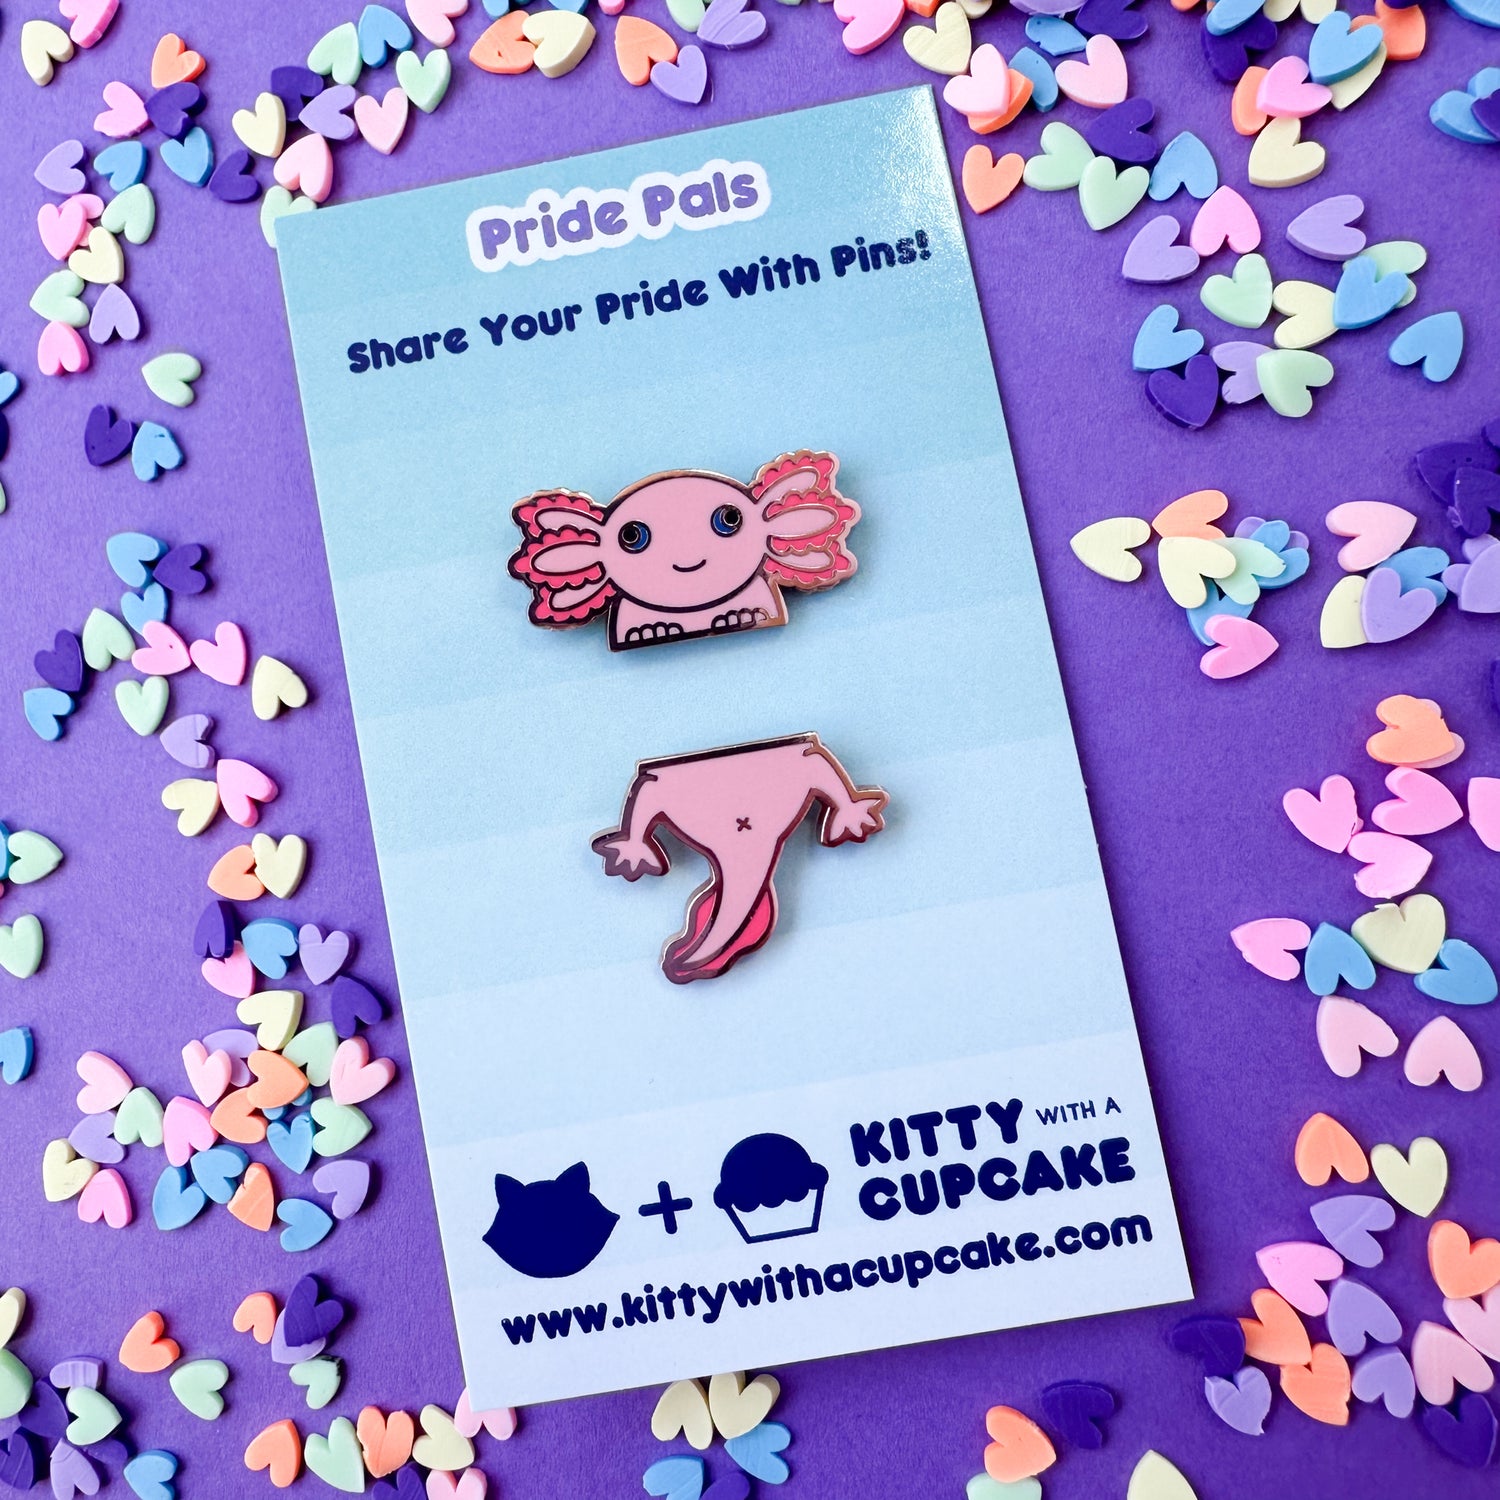 A card that reads "Pride Pals" with two pins on it each repressing the top and bottom half of a pink axolotl.